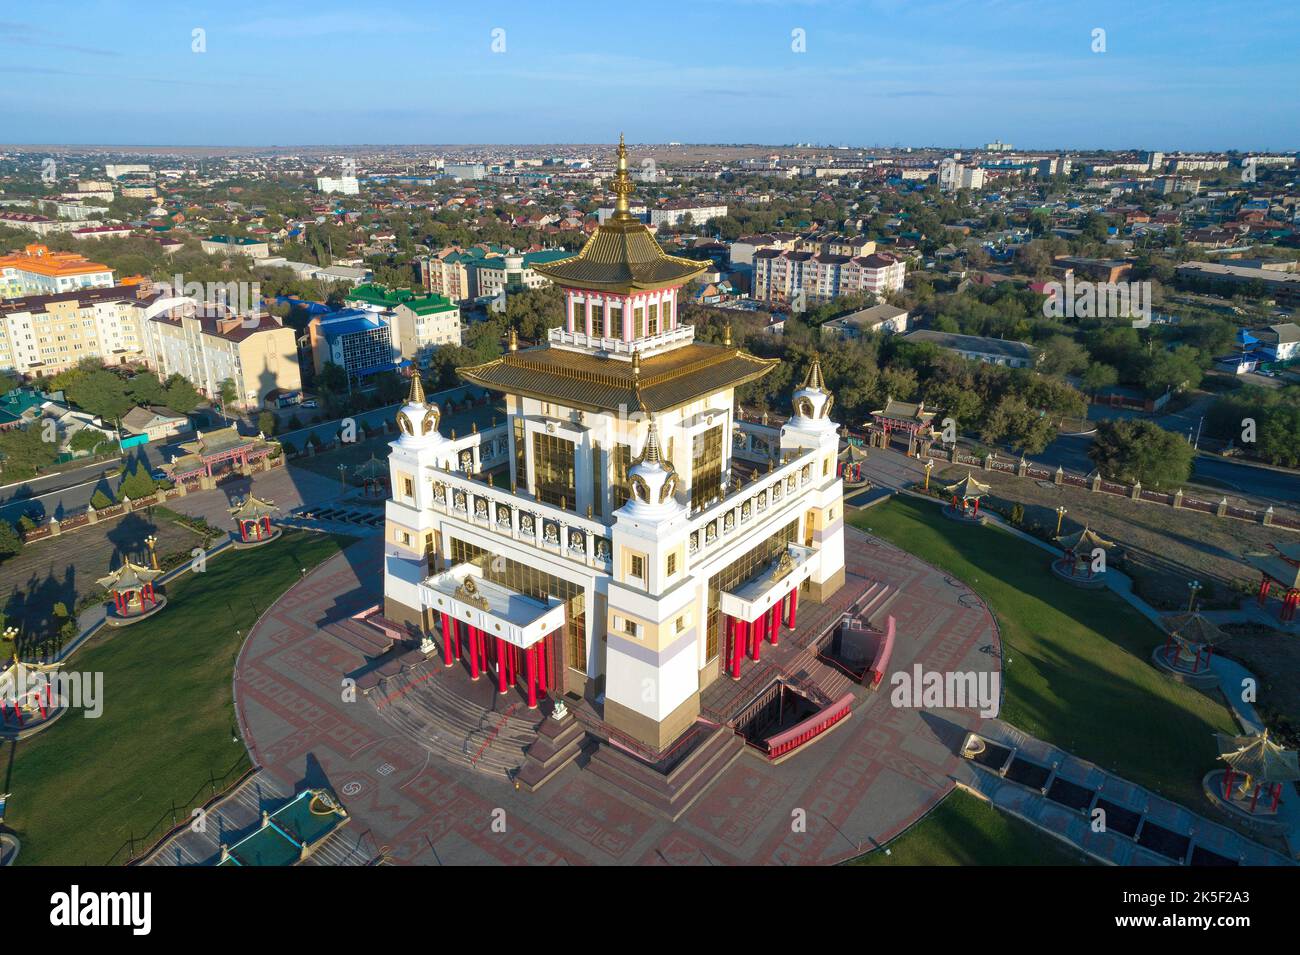 ELISTA, RUSSIA - SEPTEMBER 21, 2021: Buddhist Temple 'Golden Abode of Buddha Shakyamuni' in the cityscape on a sunny September morning (aerial view) Stock Photo